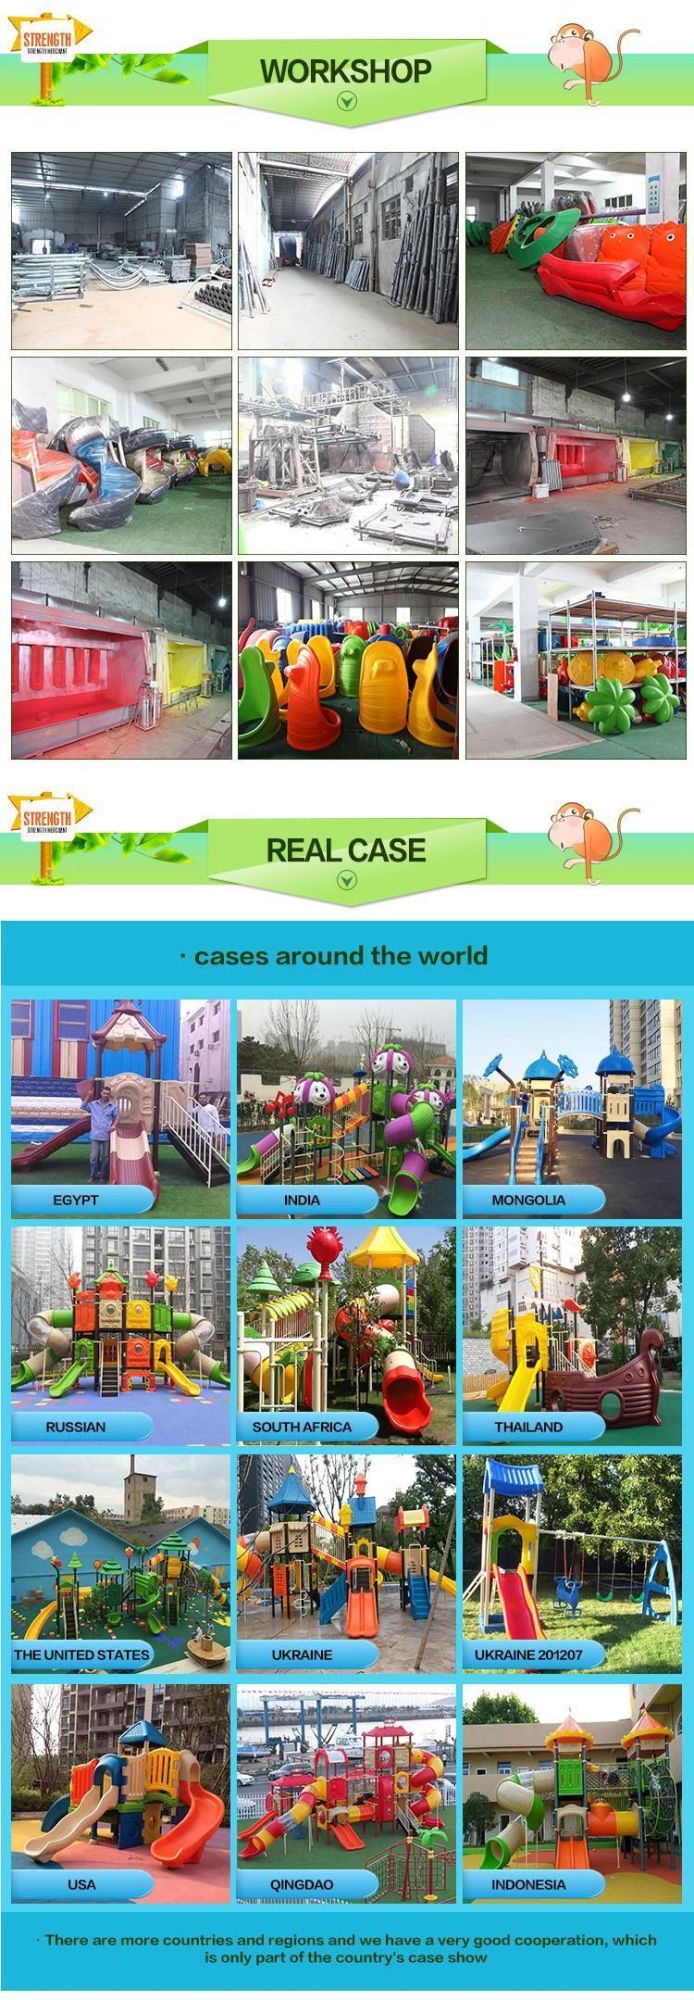 Water Slide Hot New Products Amusement Park Plastic Outdoor Playground